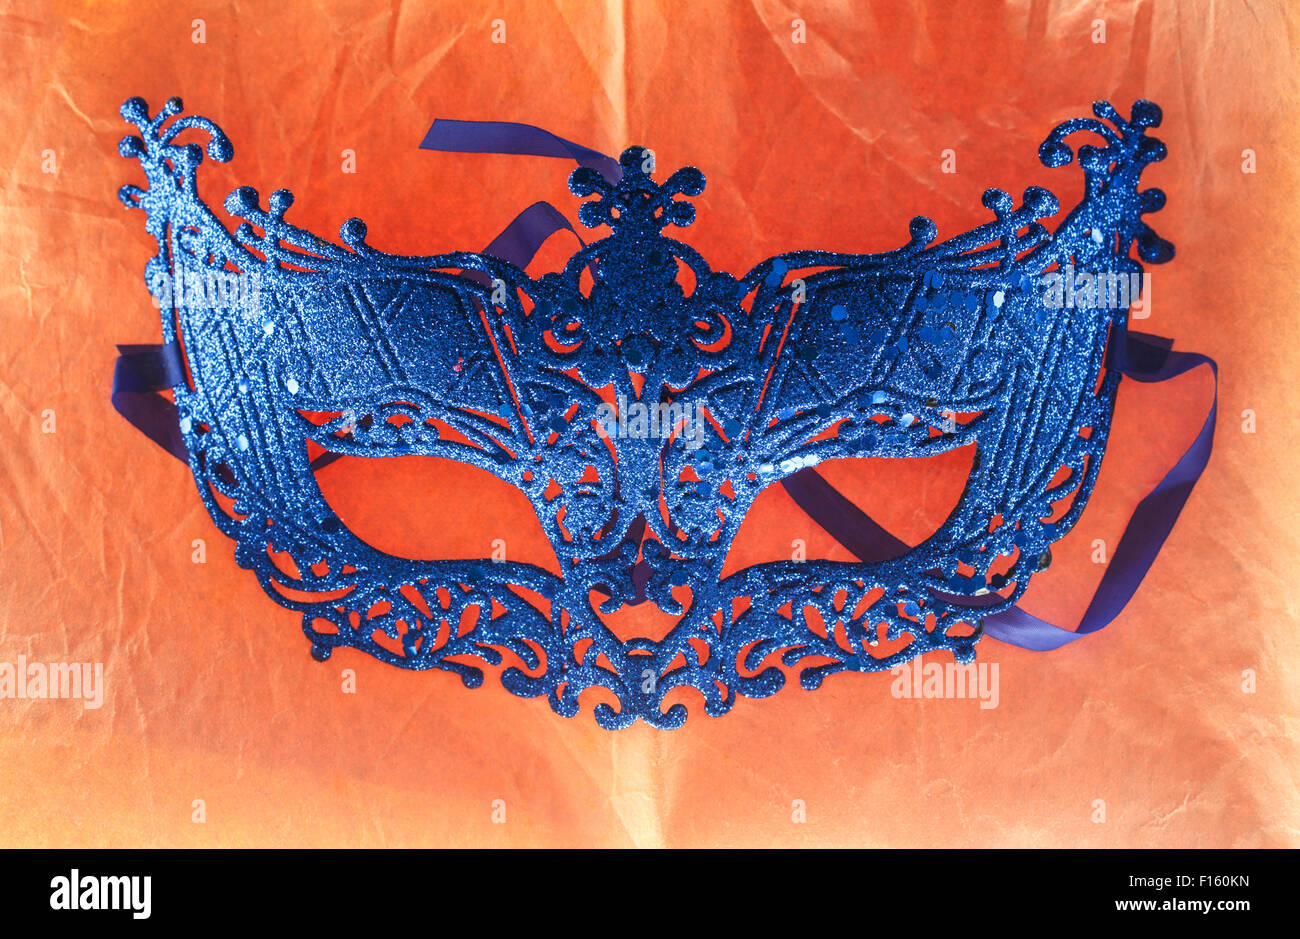 Single carnival disguise mask in close up Stock Photo